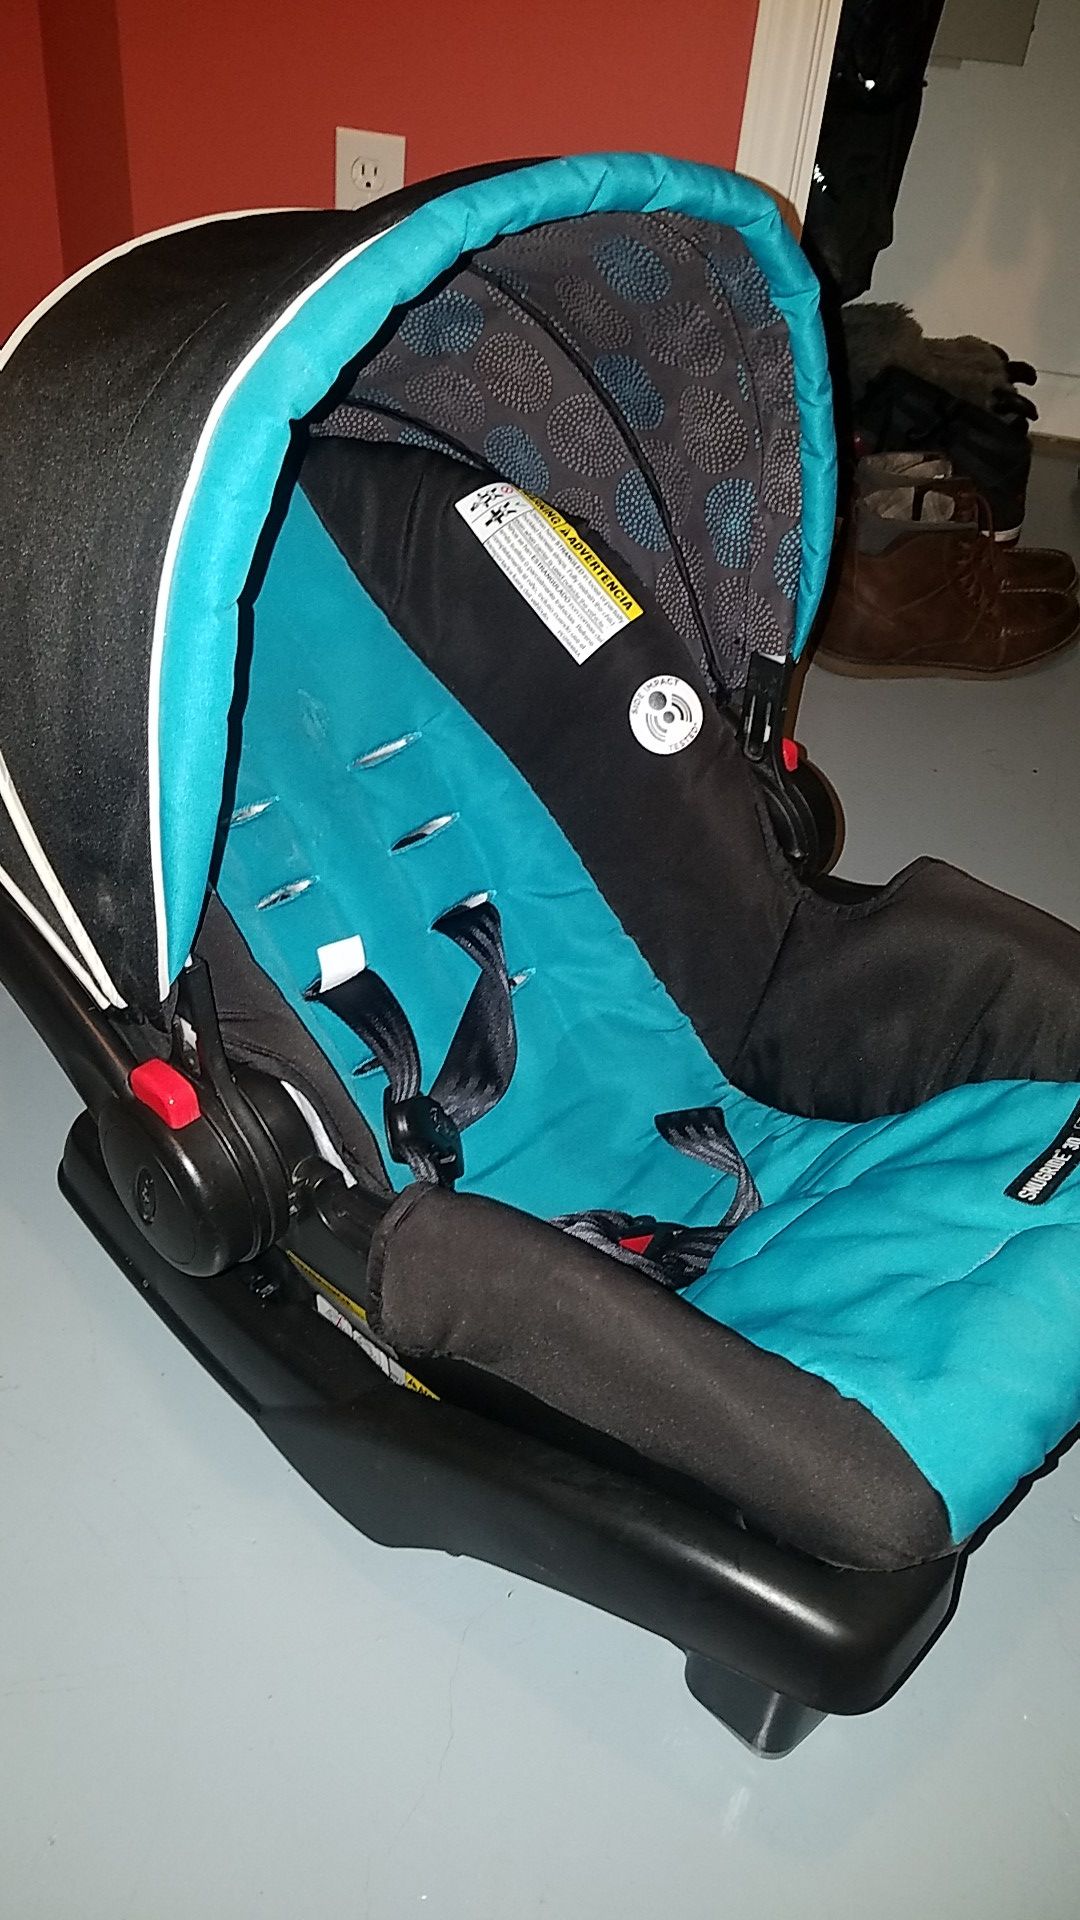 Free GRACO carseat